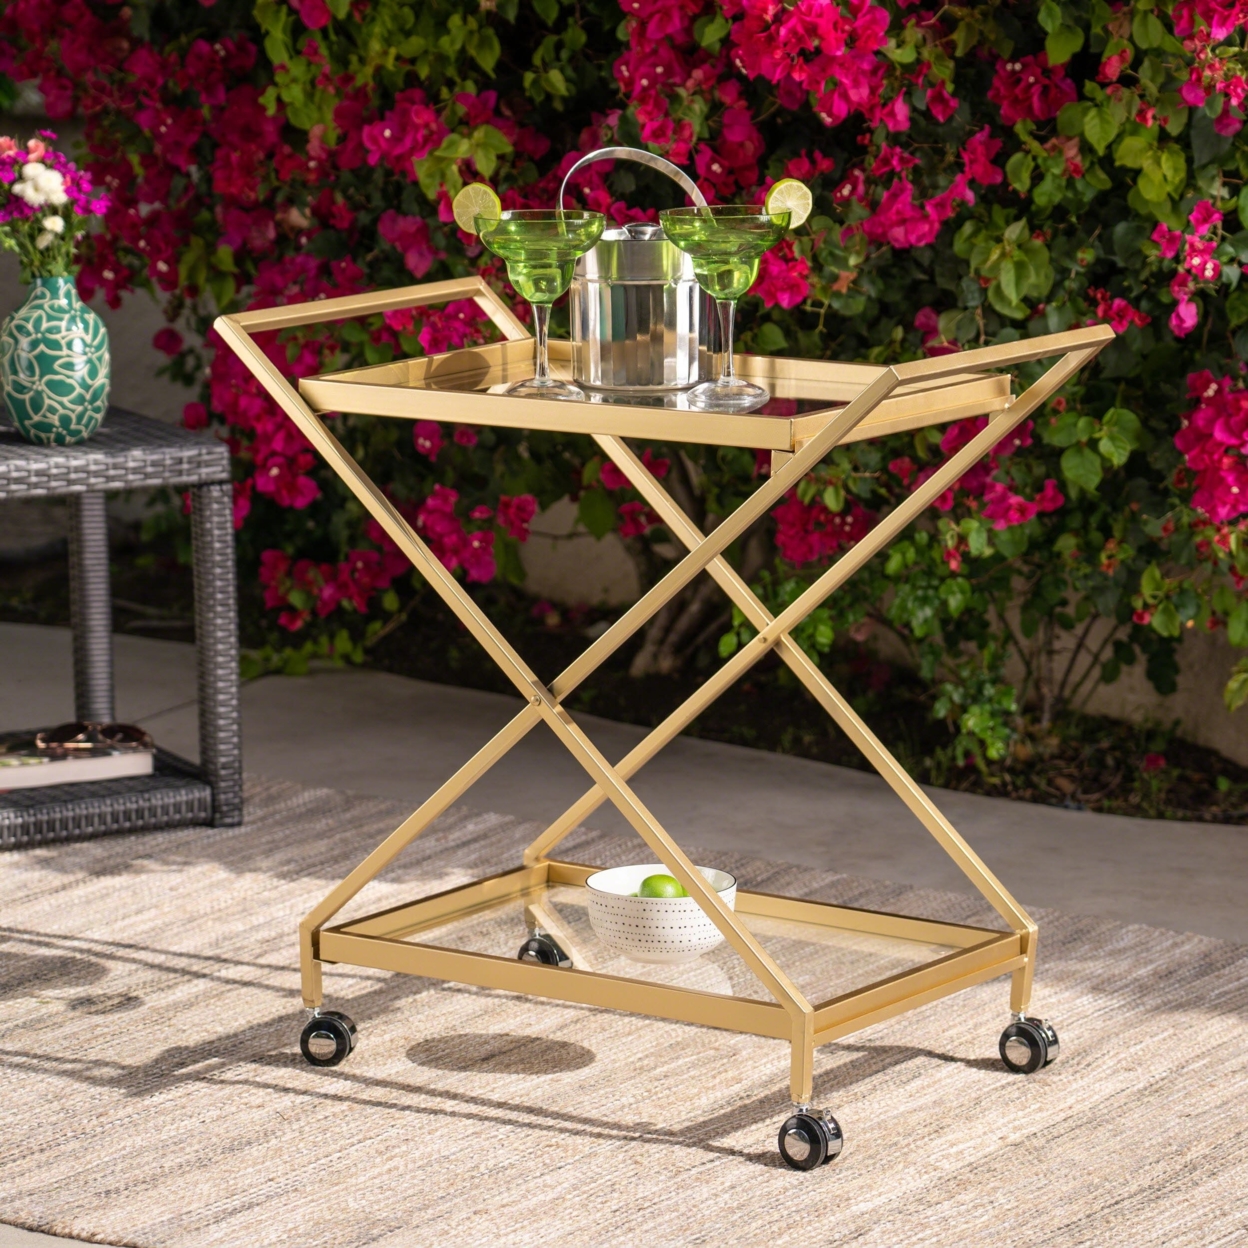 Ishtar Outdoor Powder Coated Iron And Glass Bar Cart, Gold